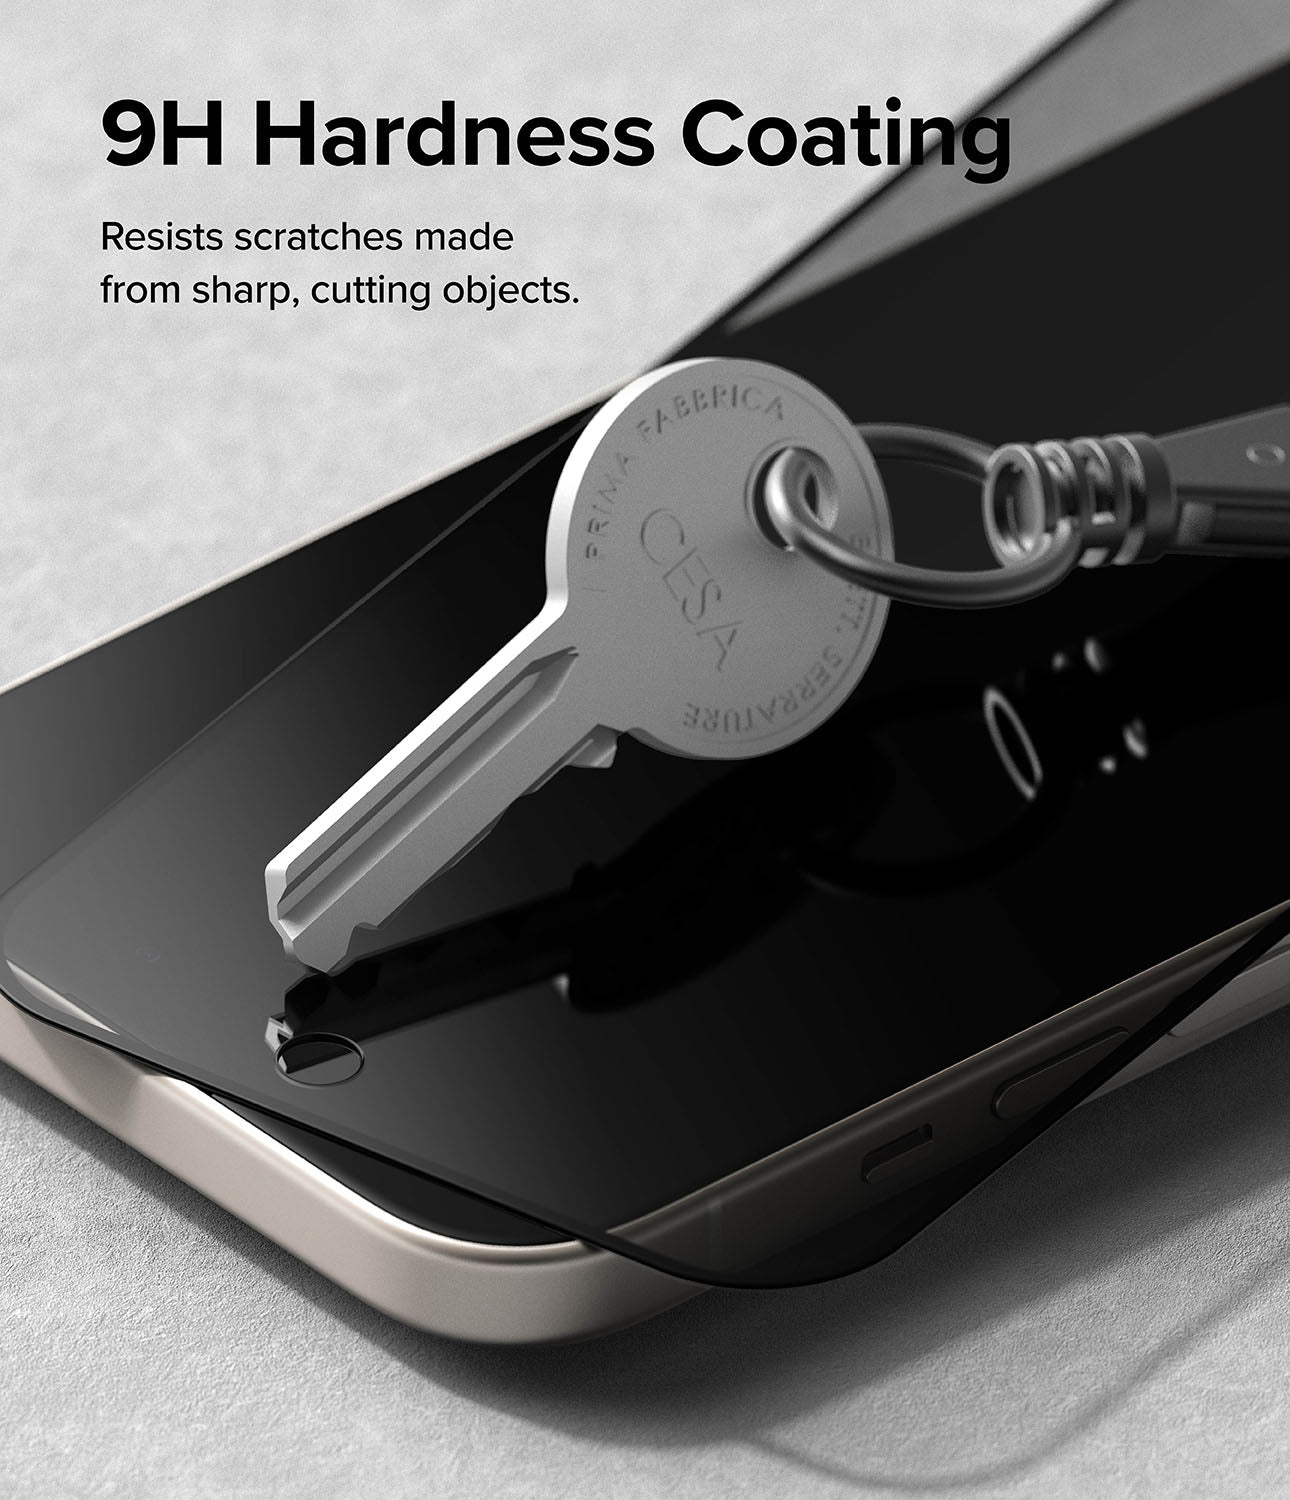 iPhone 15 Plus Screen Protector | Privacy Glass - 9H Hardness Coating. Resists scratches made from sharp, cutting objects.